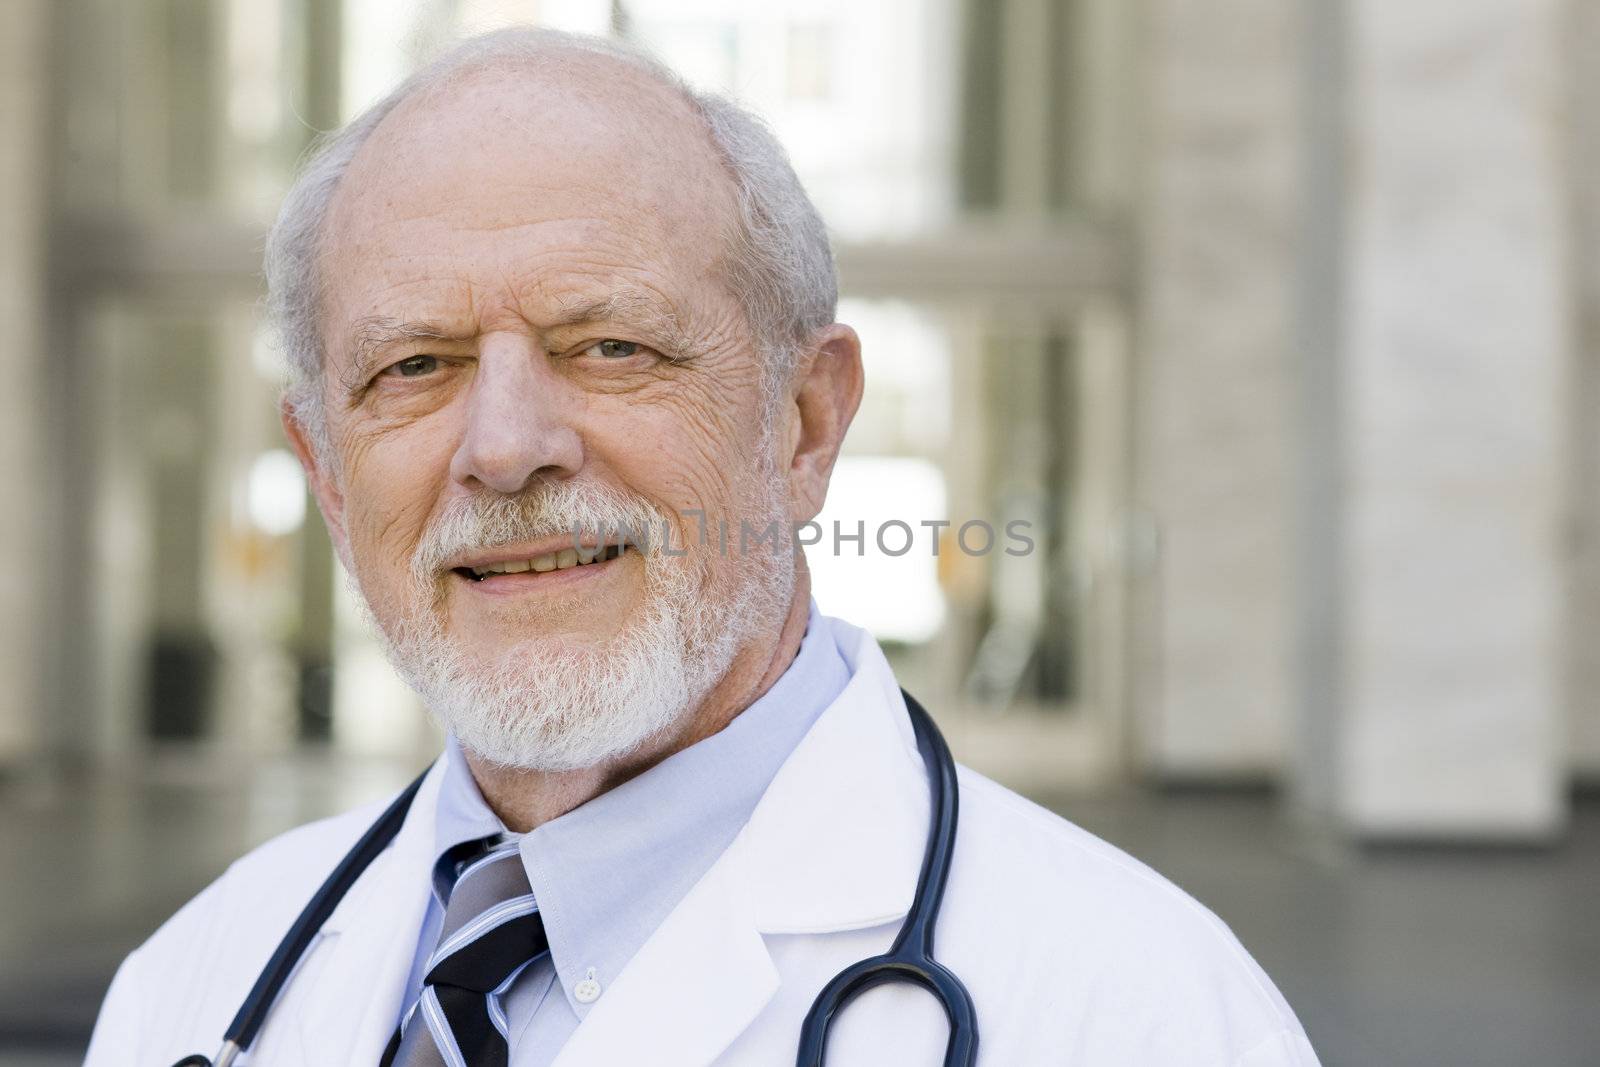 Portrait of an Old Male Doctor with a Stethoscope around His Neck